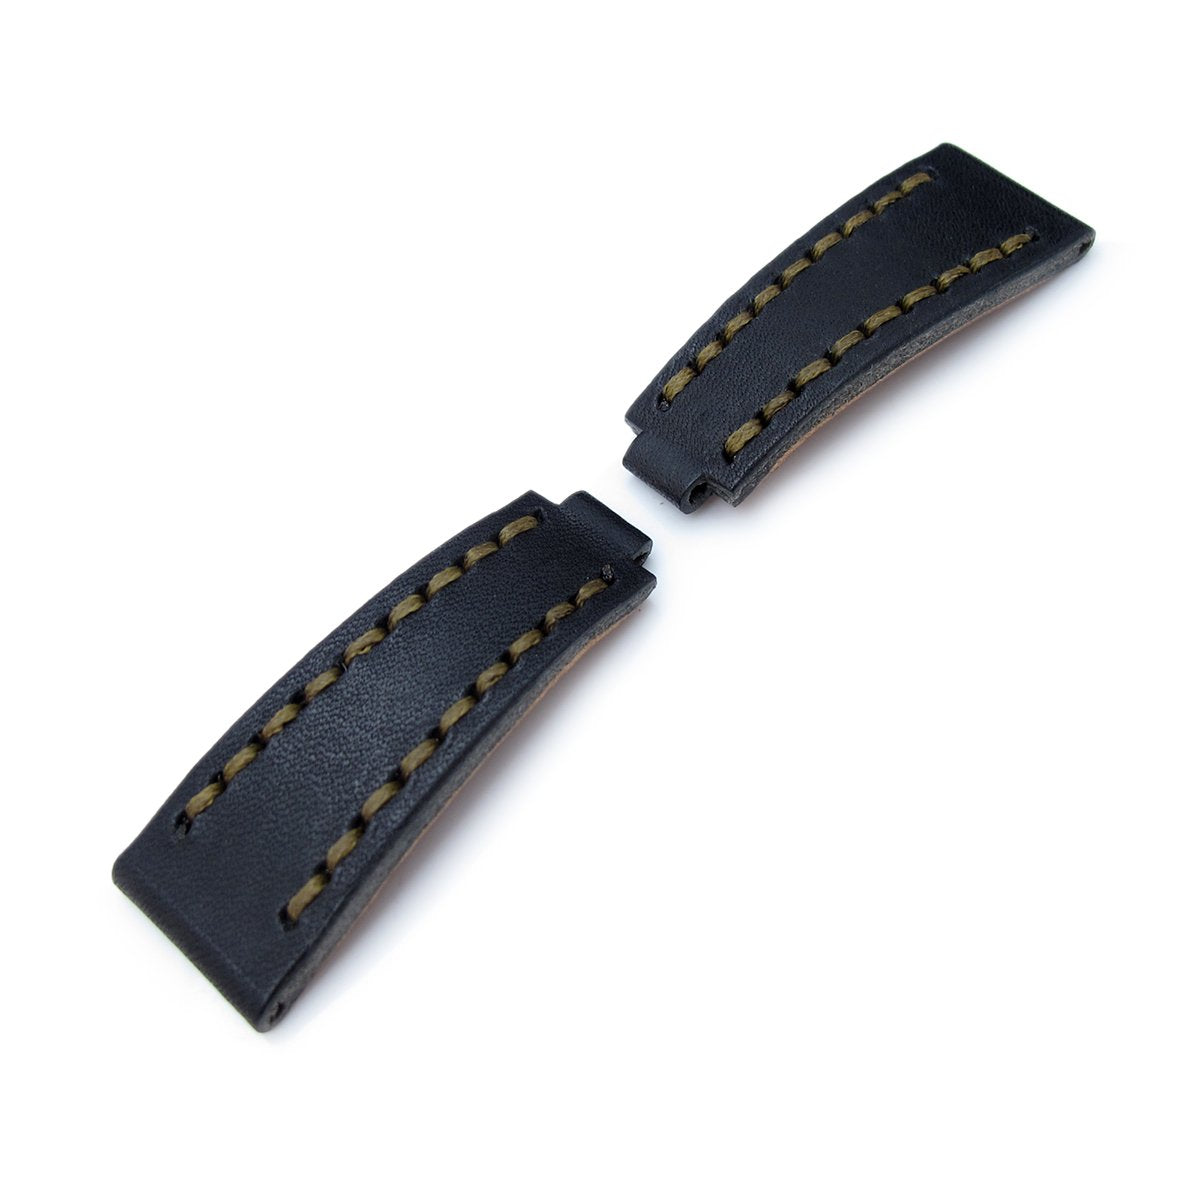 20mm MiLTAT RX Collection Watch Strap NERO Black Genuine Calf Green St. Tailor-made for RX SUB & EXP Strapcode Watch Bands